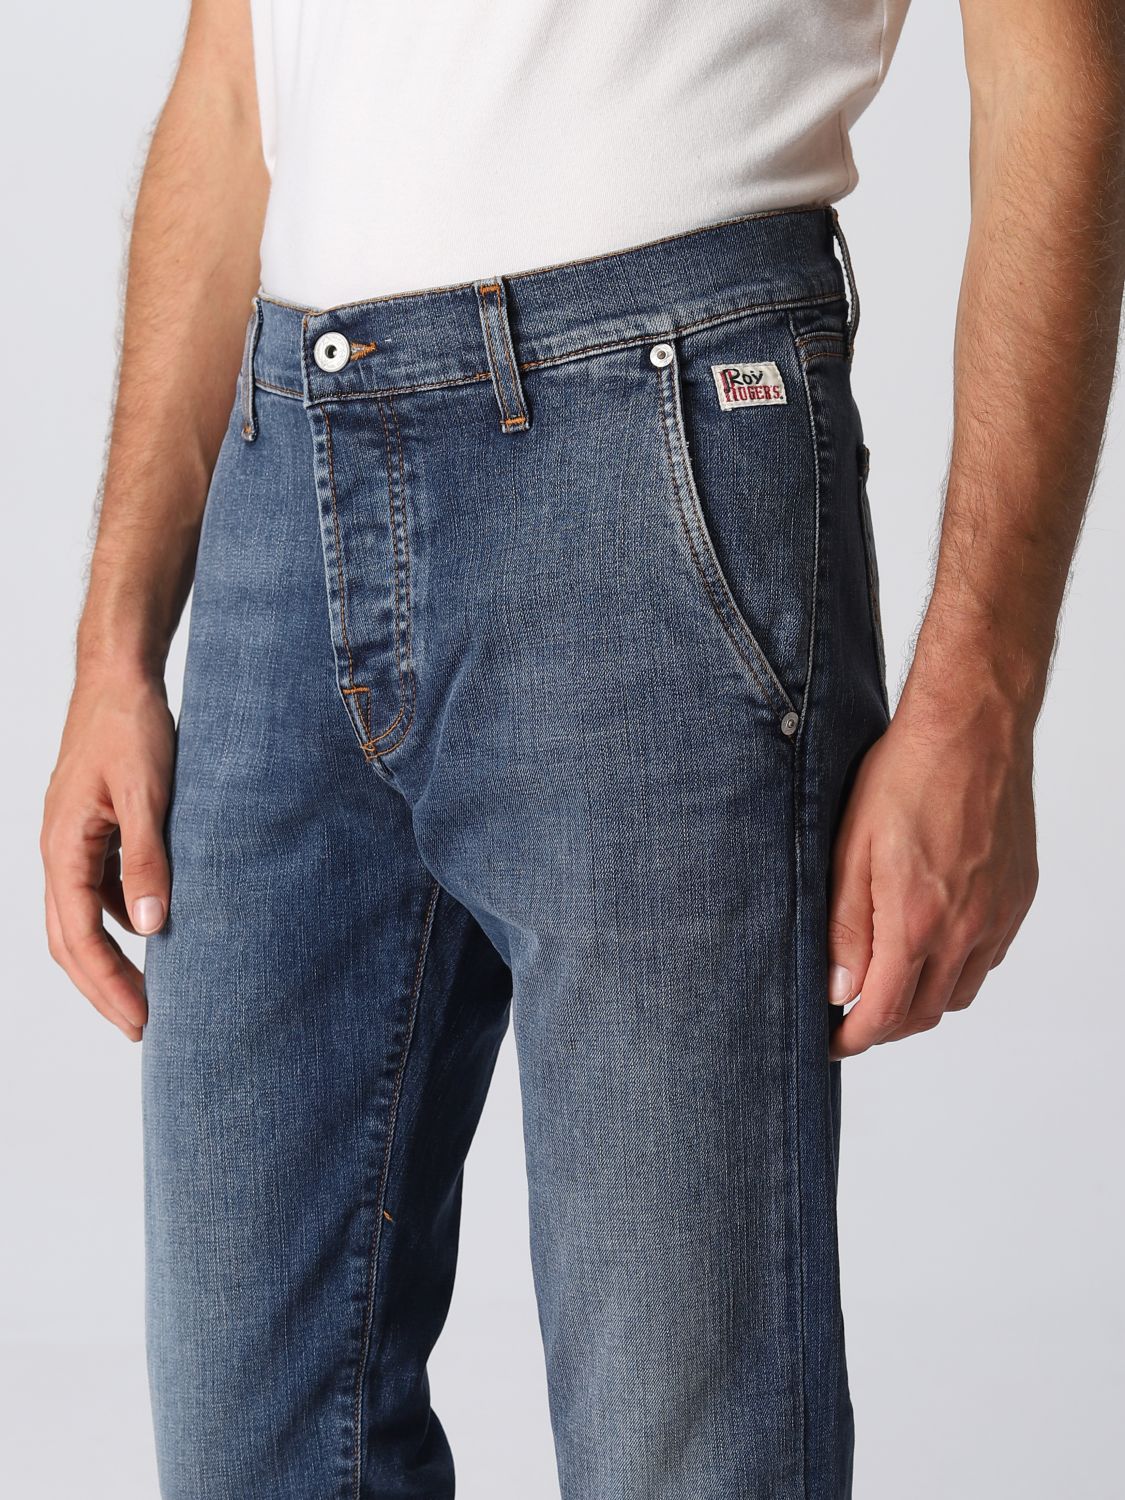 Jeans Roy Rogers: Jeans Roy Rogers para hombre azul oscuro 3